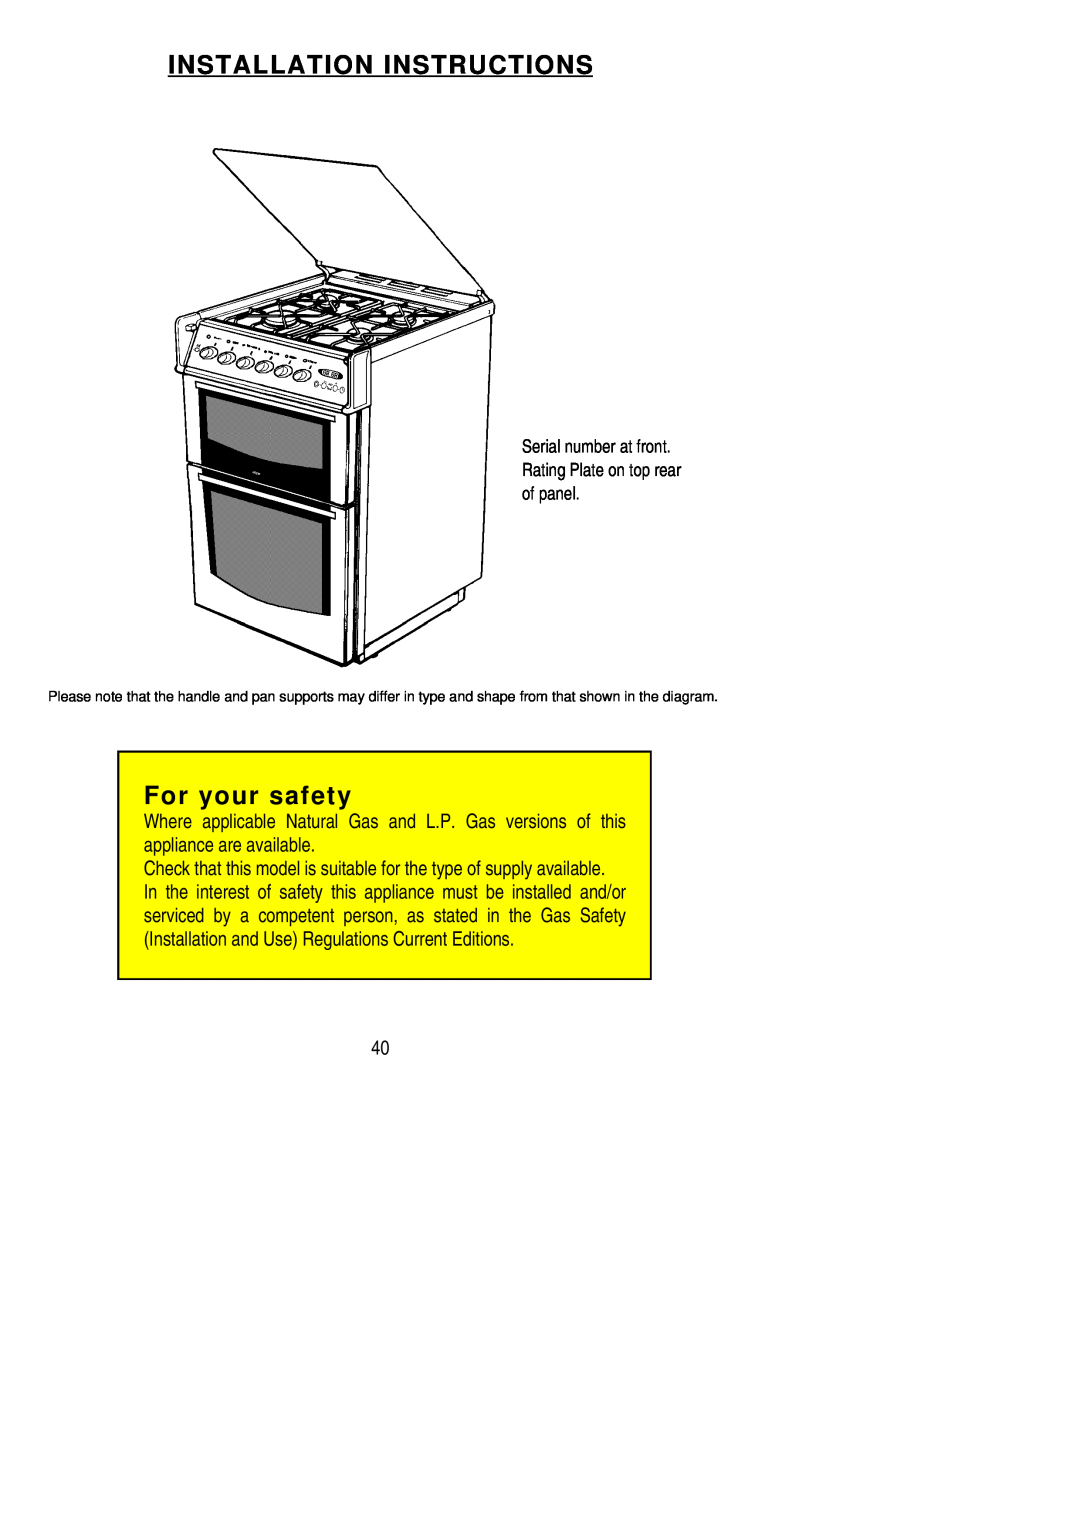 Electrolux SG 424 Installation Instructions, For your safety, Serial number at front. Rating Plate on top rear of panel 